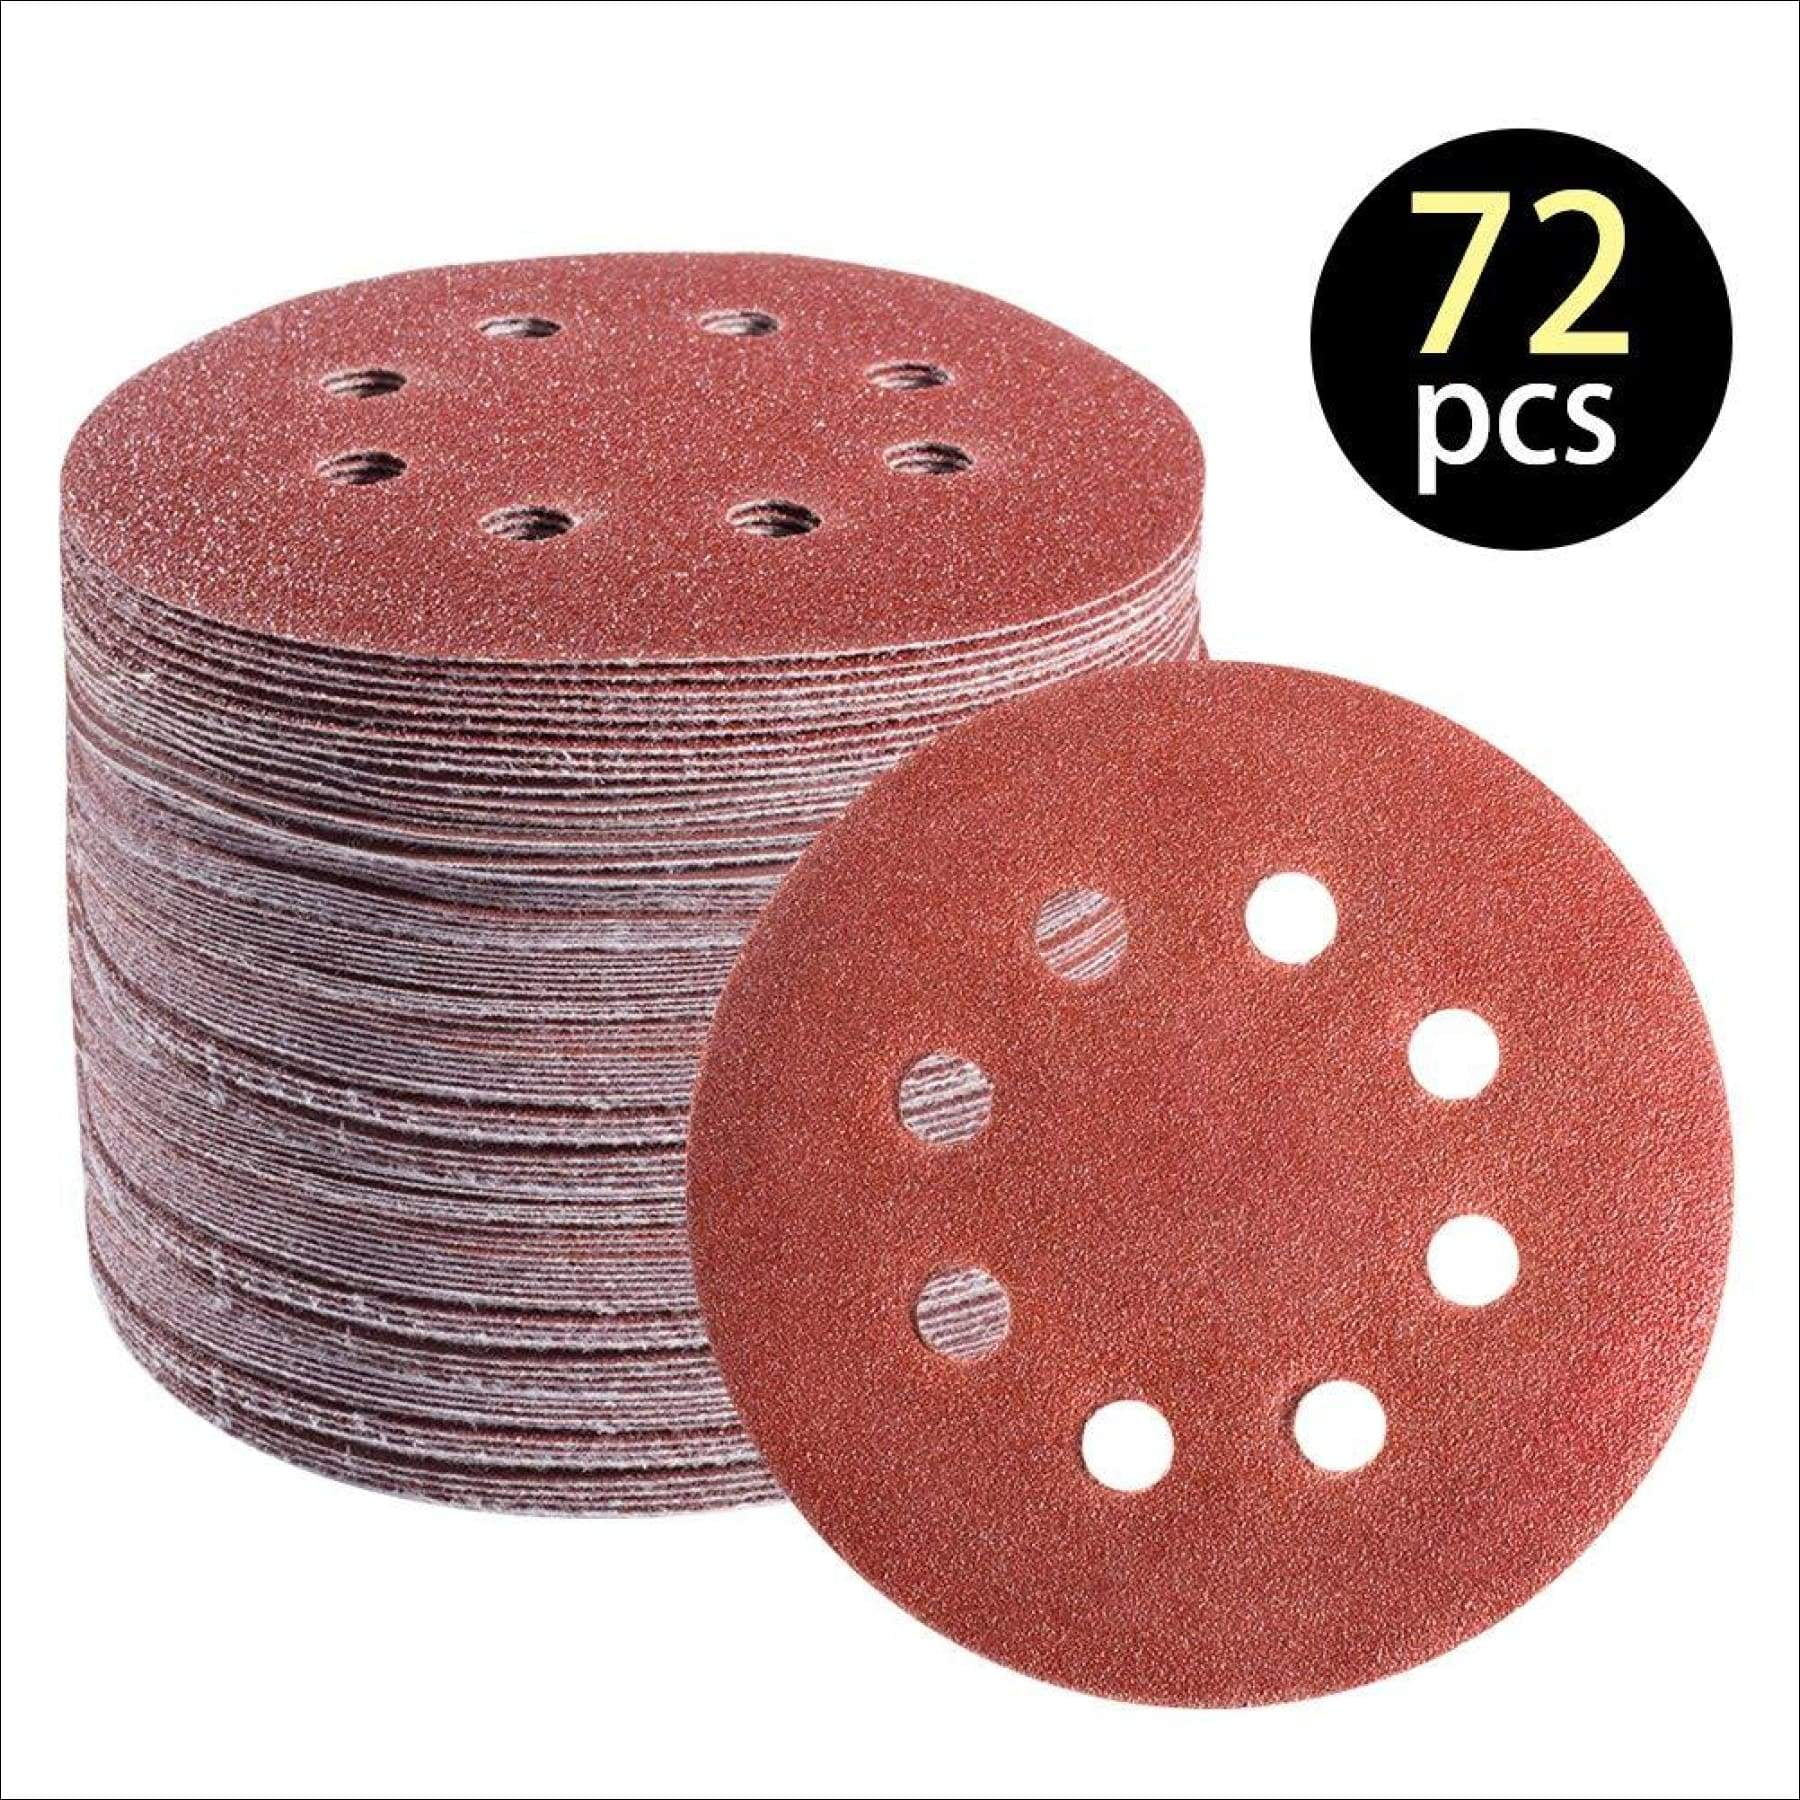 uxcell 140 Pcs 3 Inch Hook and Loop Sanding Discs Sander Pads 40 60 80 120 150 180 240 Assorted Grits Triangle Sandpaper 